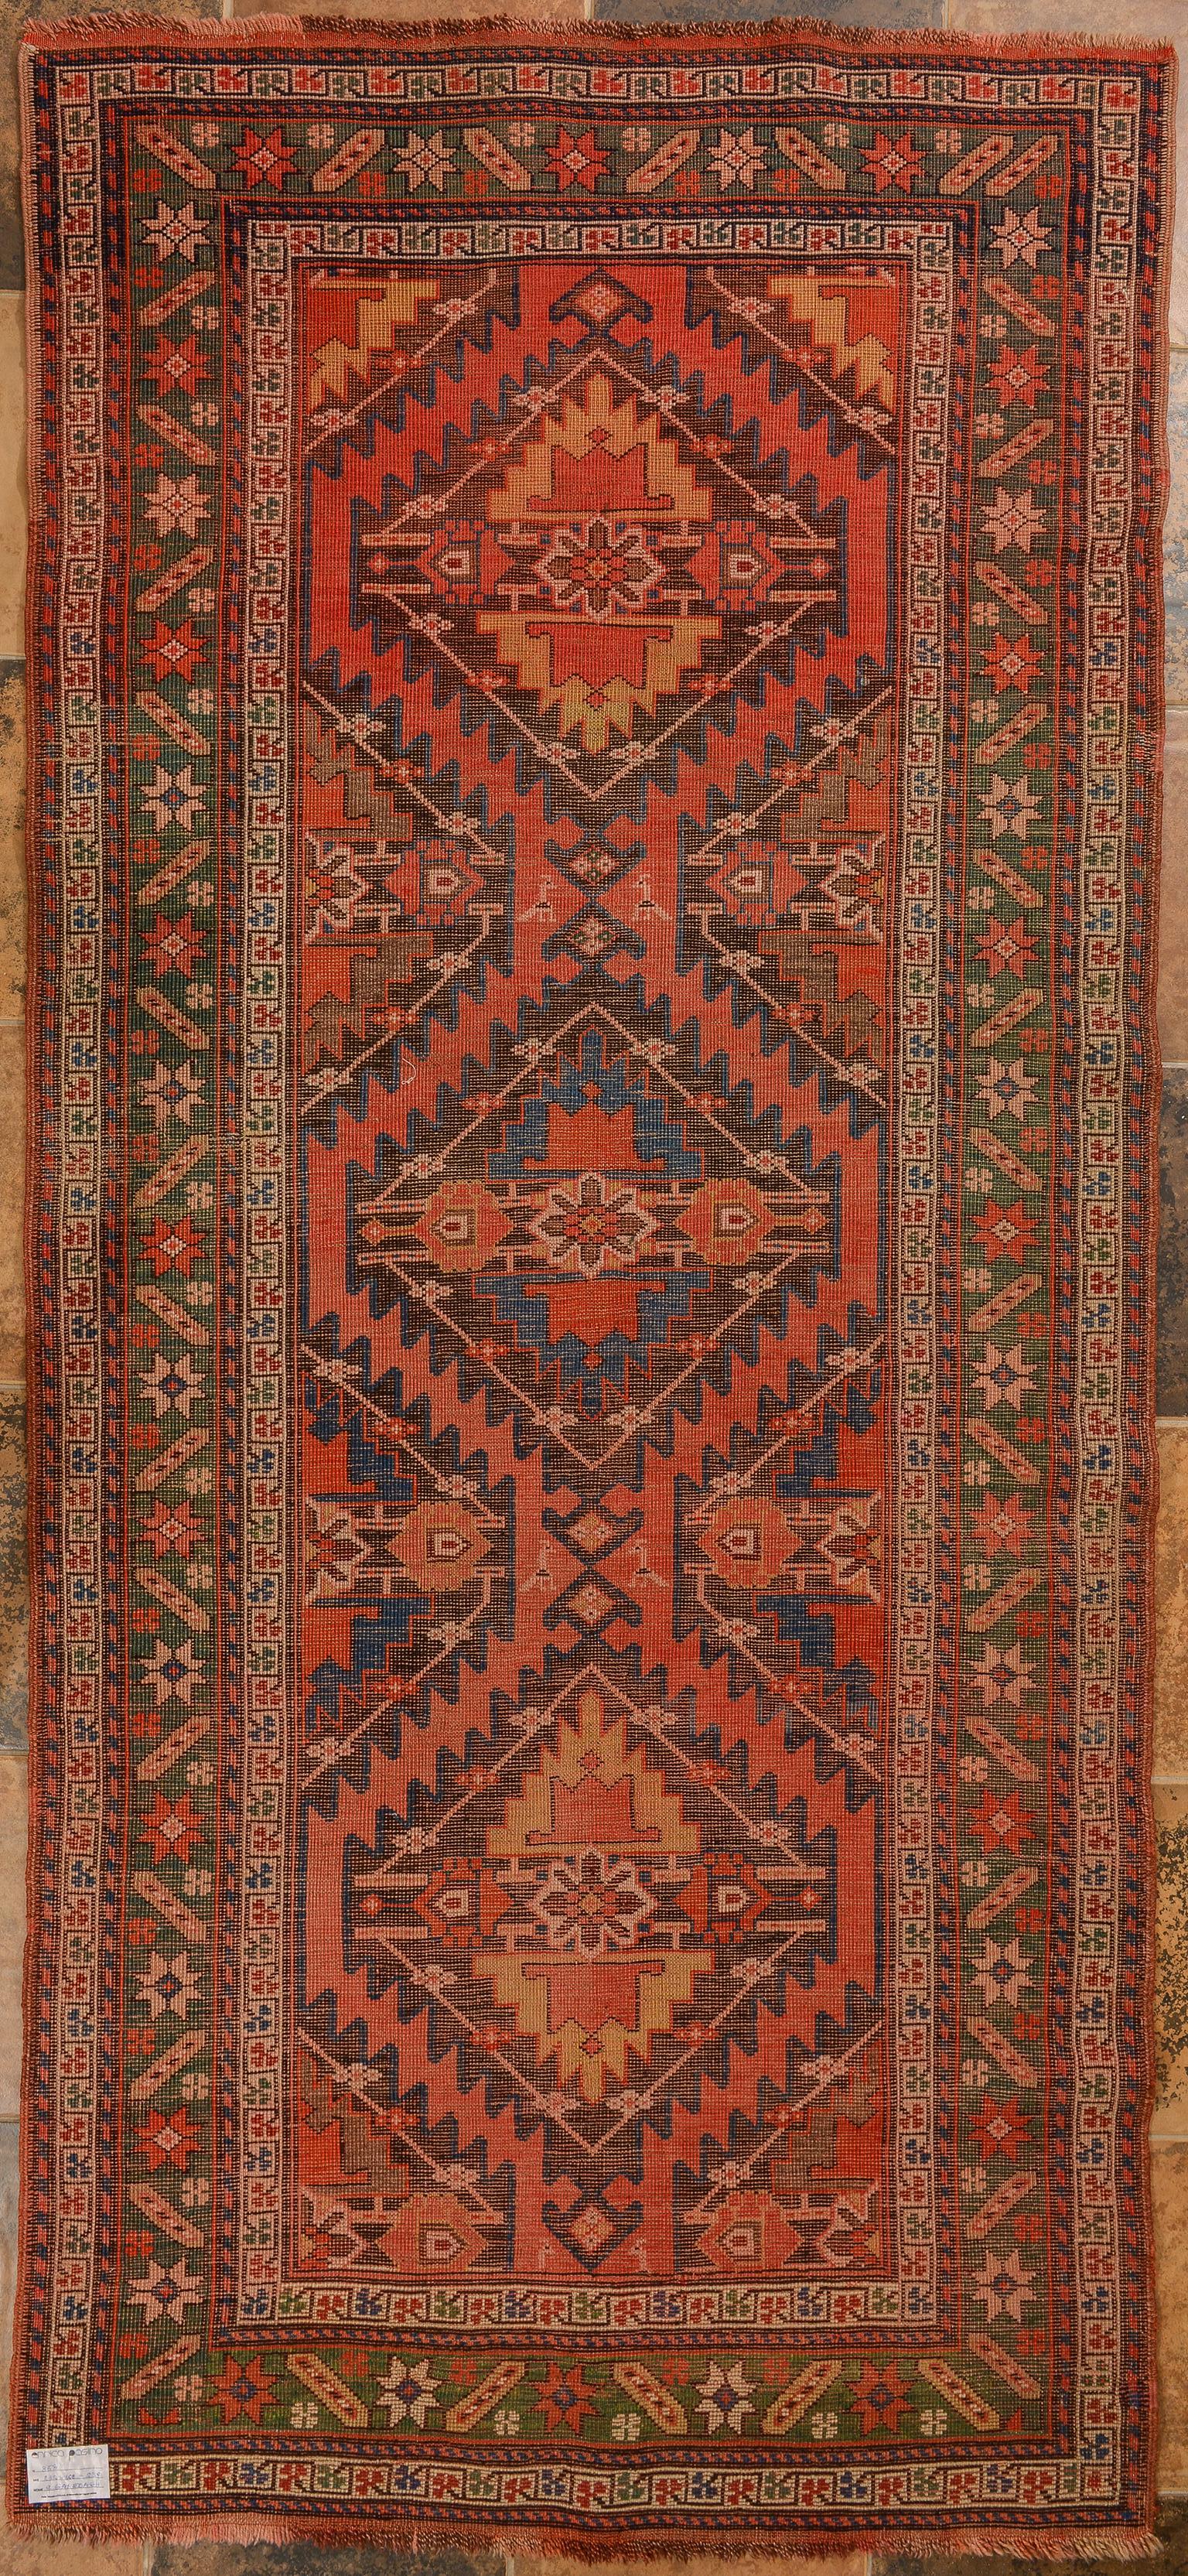 nr. 858 -  Coral pink background with green border for this beautiful Karabagh (or Garebagh) Caucasian carpet -
My carpets are not affected by fashions. After a year the new modern carpets are no longer worth the price paid because the trend has